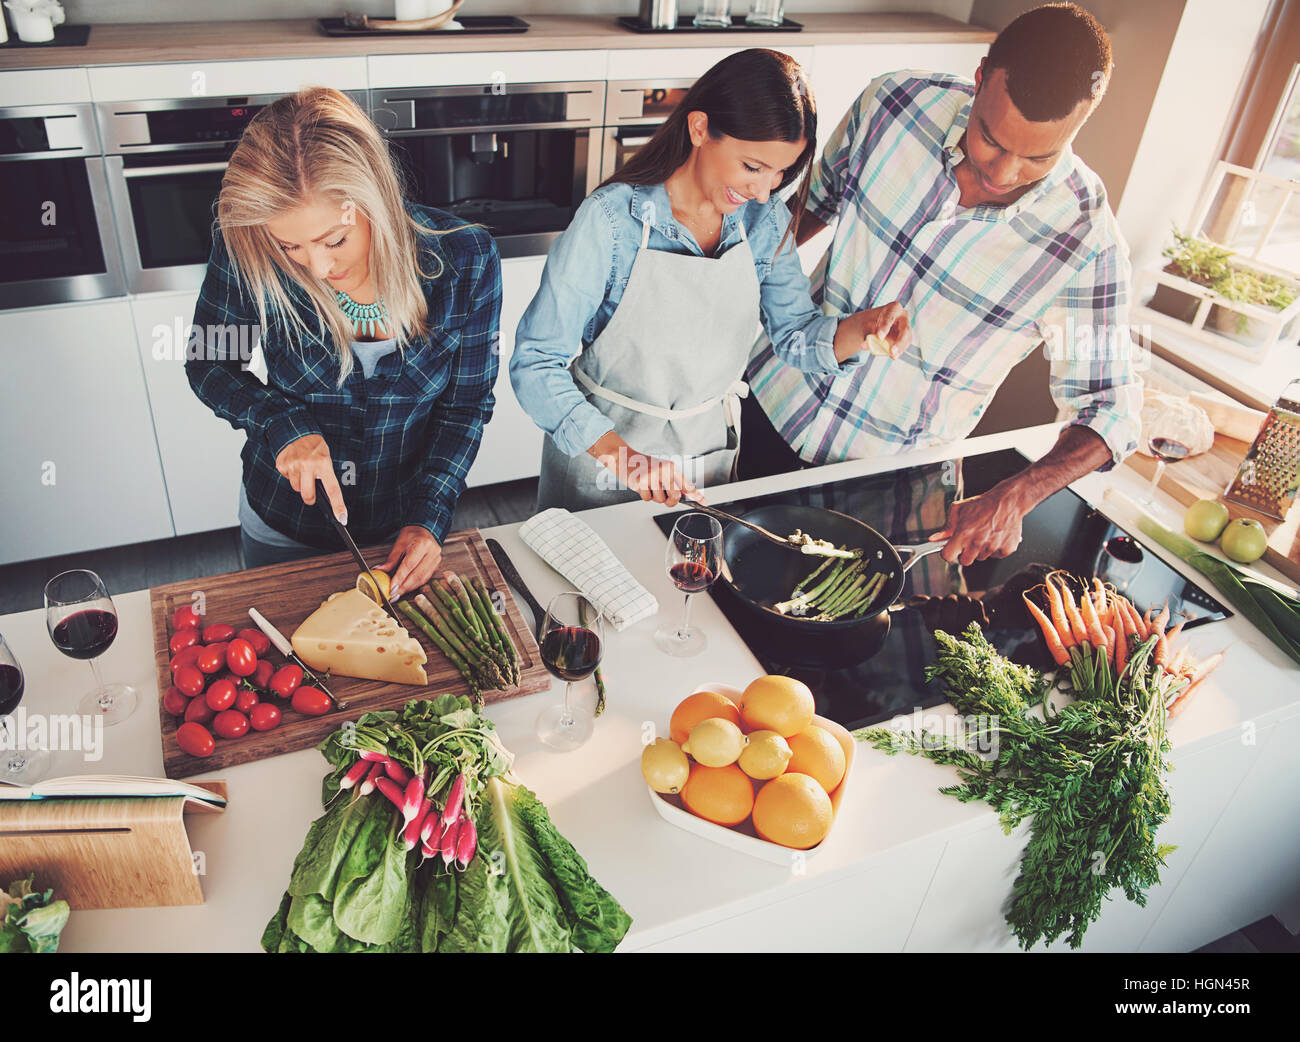 Three friends cooking at kitchen clearly having fun, shot from above Stock Photo